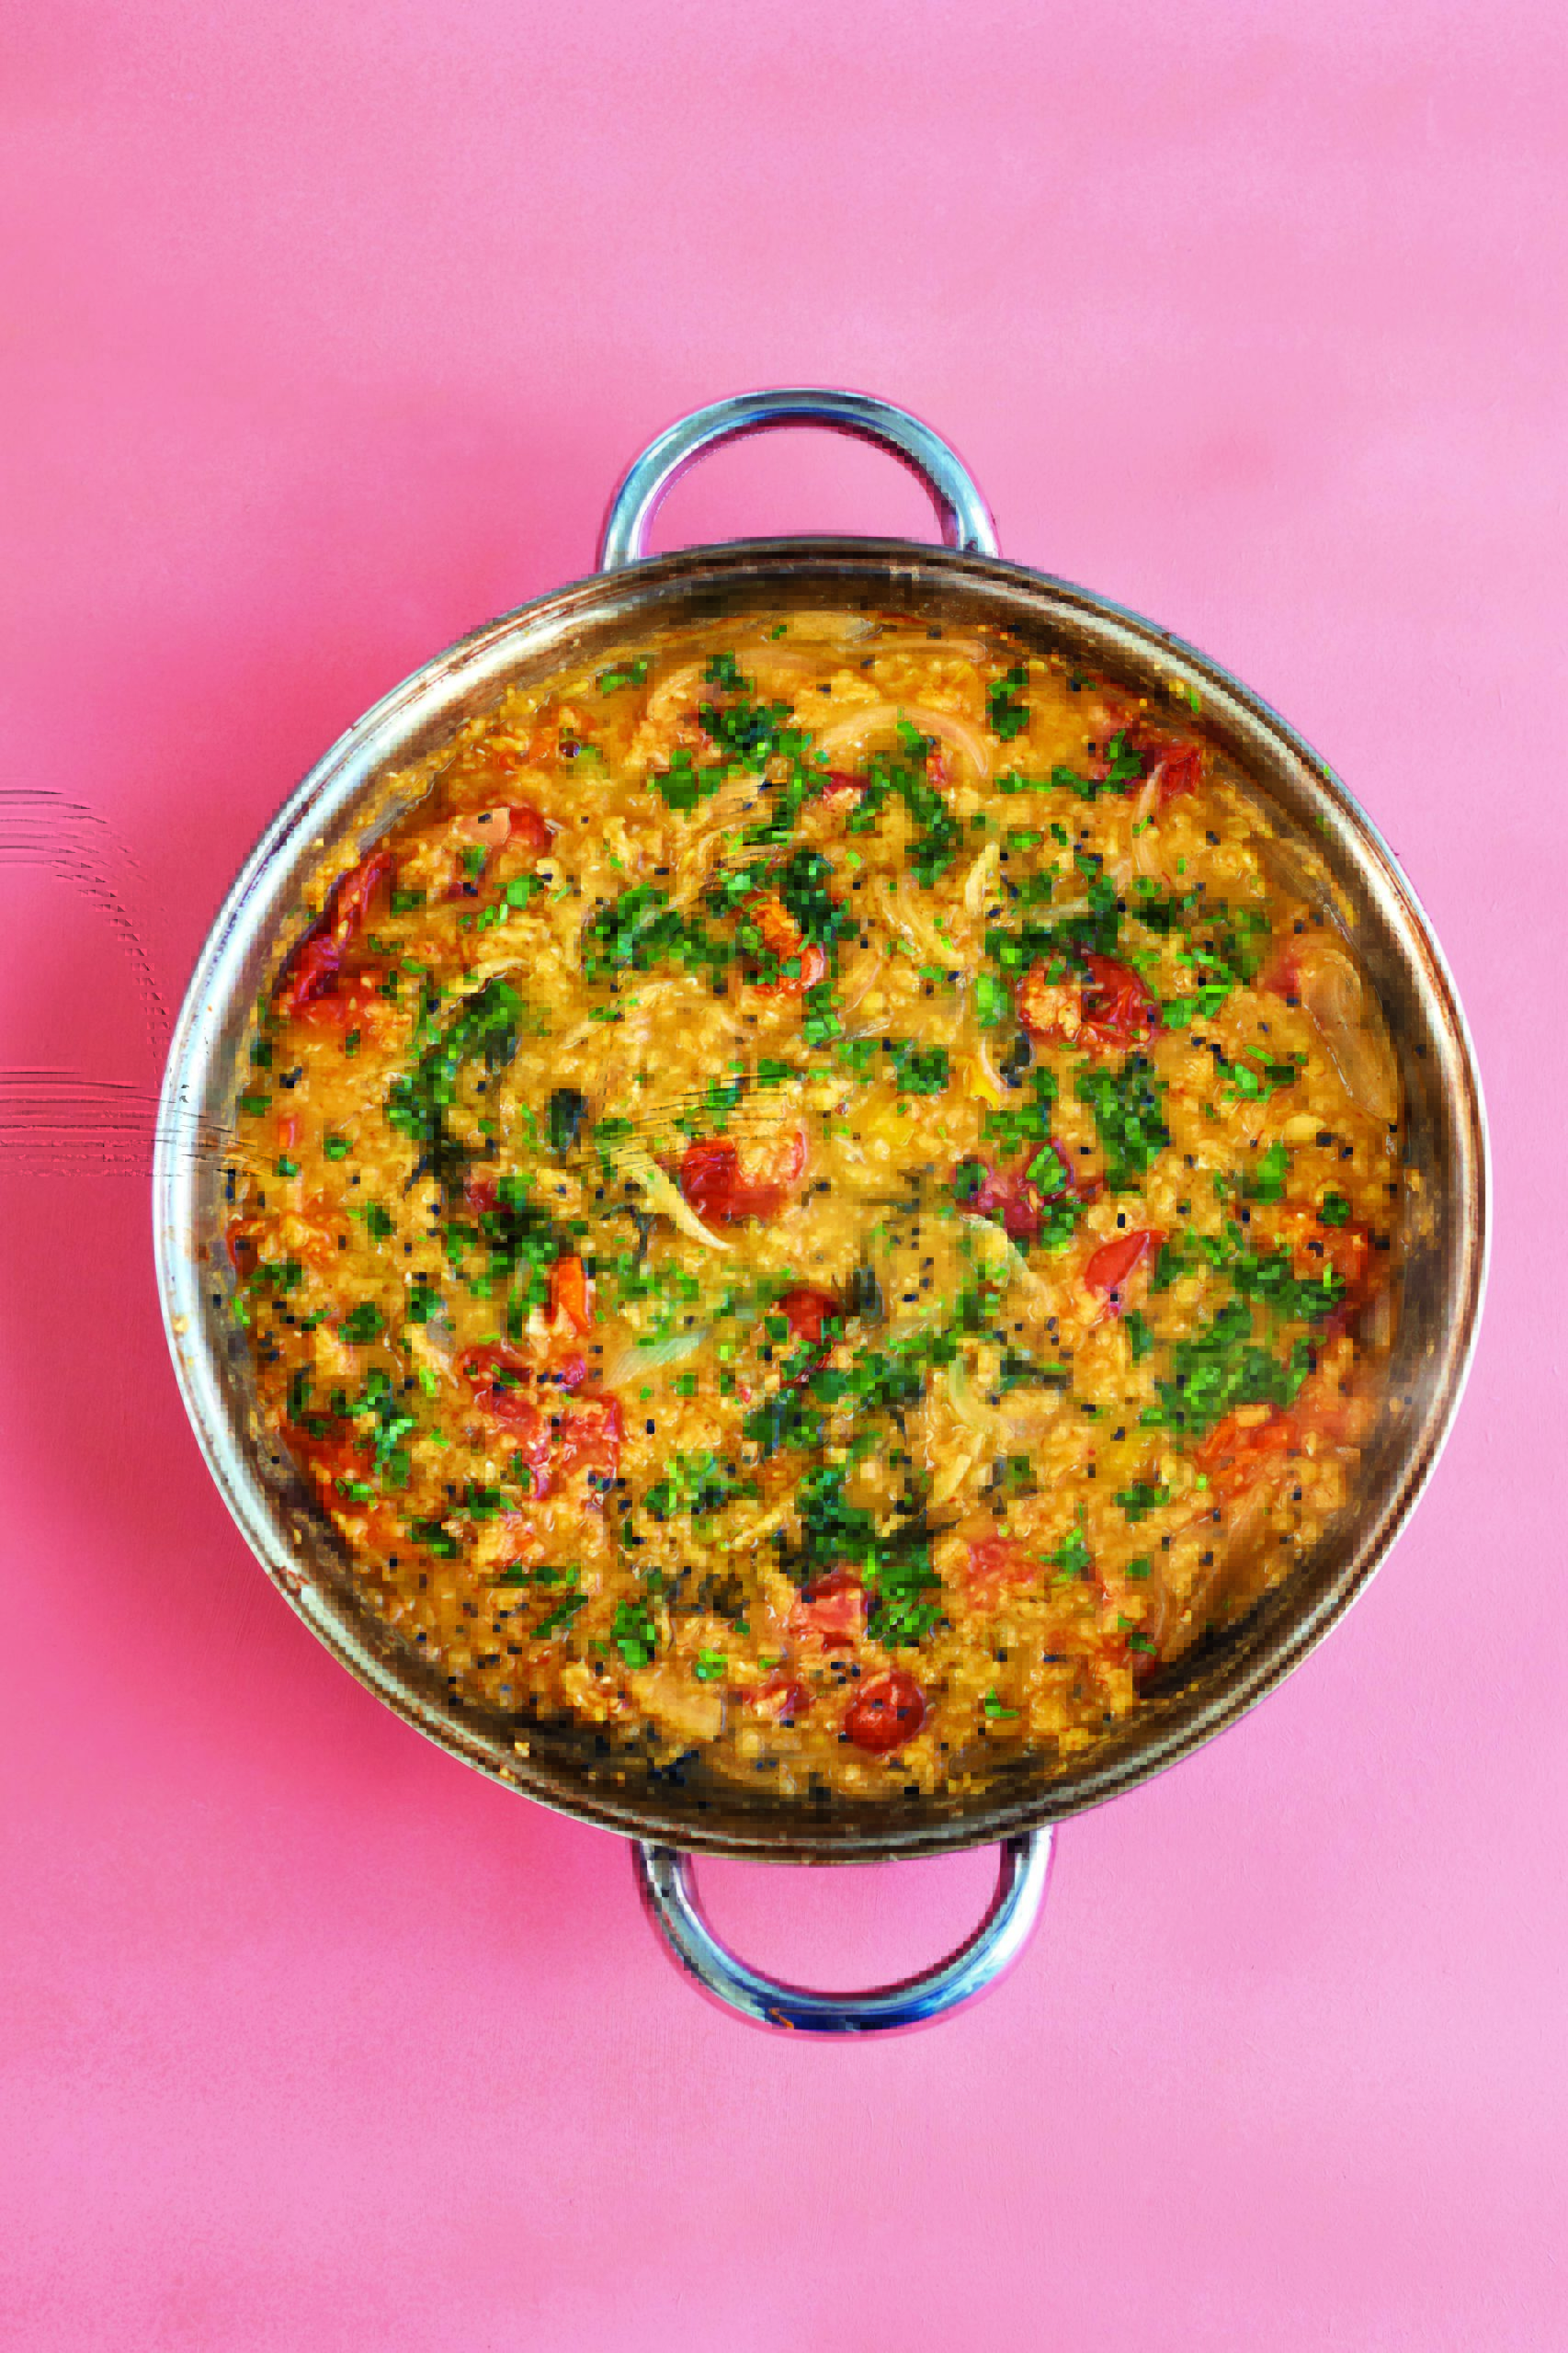 All-In-One Nigella-Spiced Whole Tomato Dhal